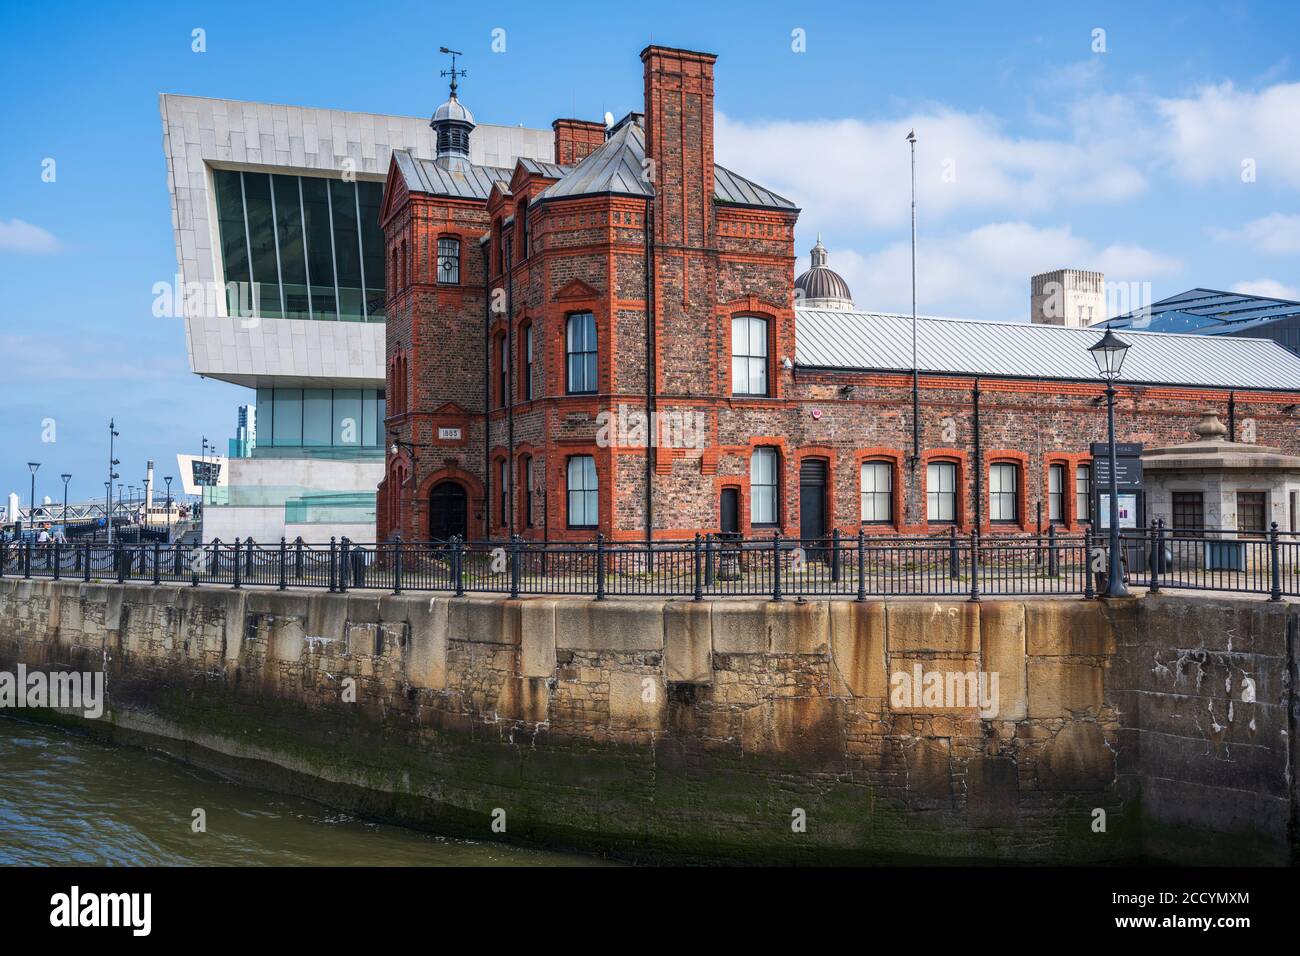 The Pilotage Building (1883) with Museum of Liverpool in background, Pier Head, Liverpool, England, UK Stock Photo